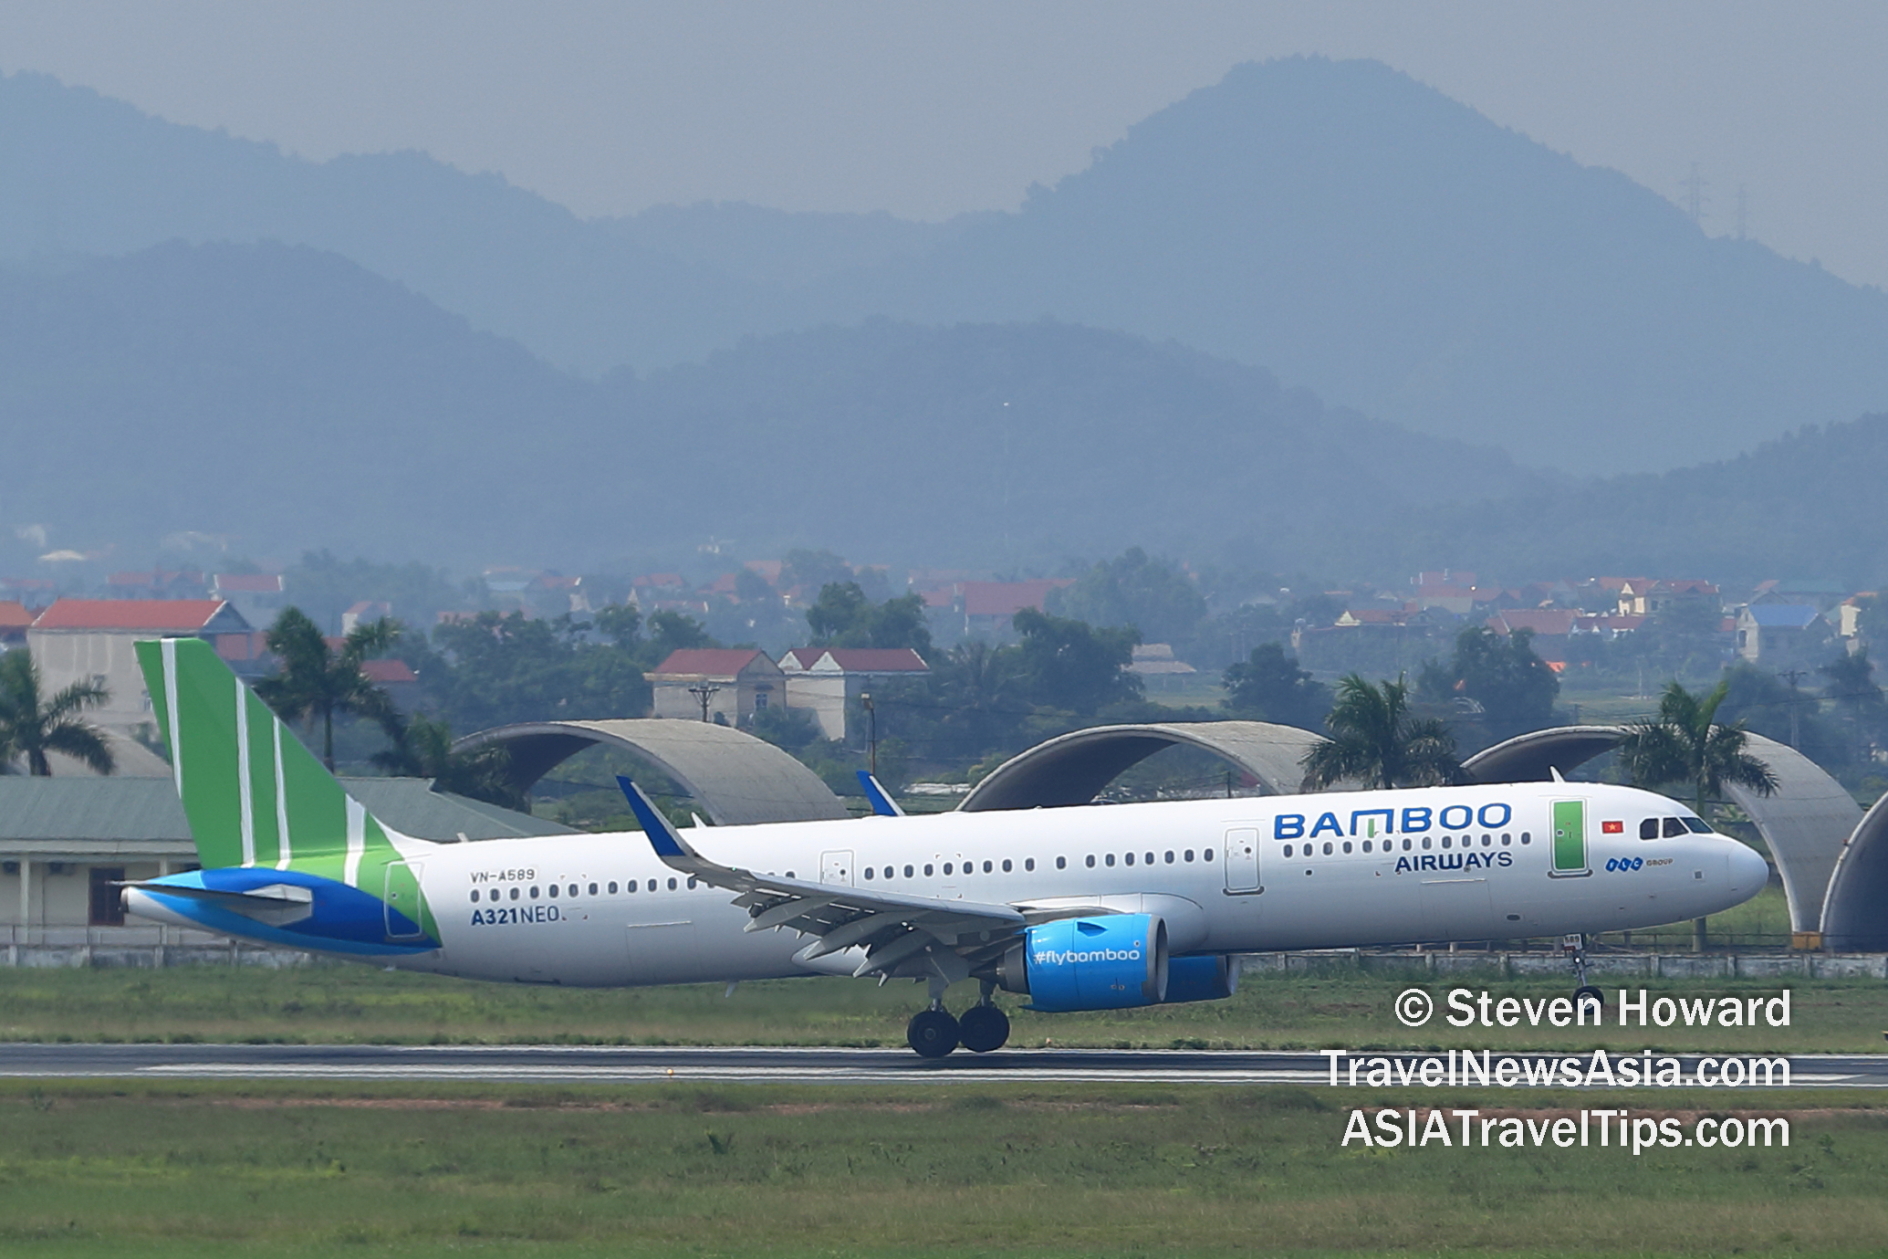 Bamboo Airways Airbus A321neo Registration: VN-A589.  Image by Steven Howard from TravelNewsAsia.com Click to enlarge.